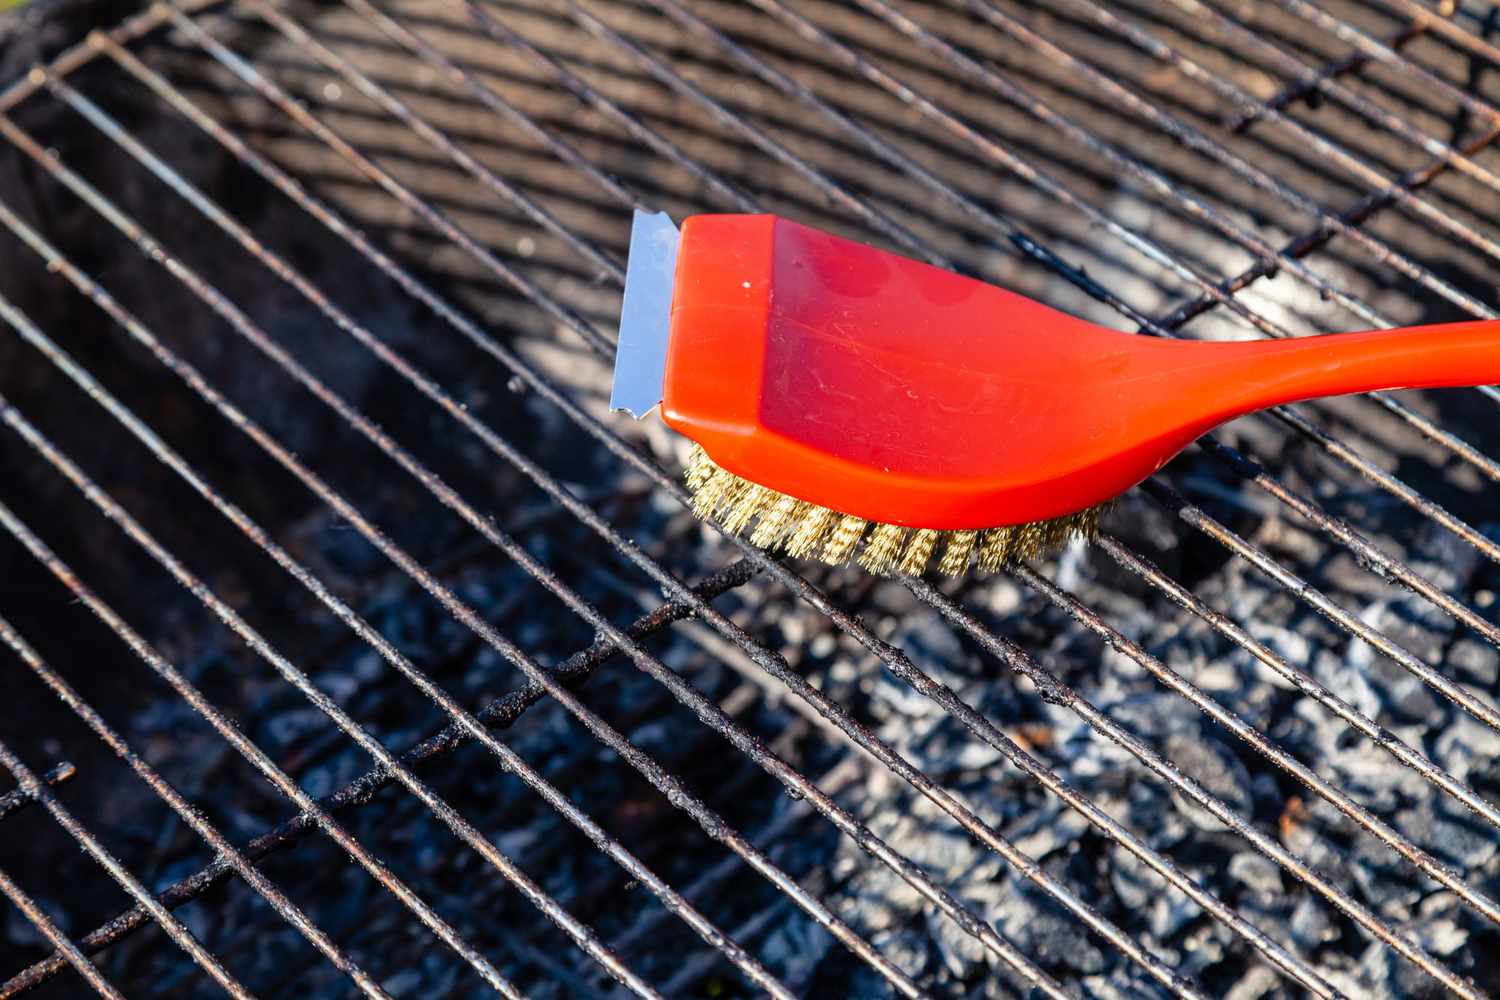 cleaning bbq grill with red wire brush